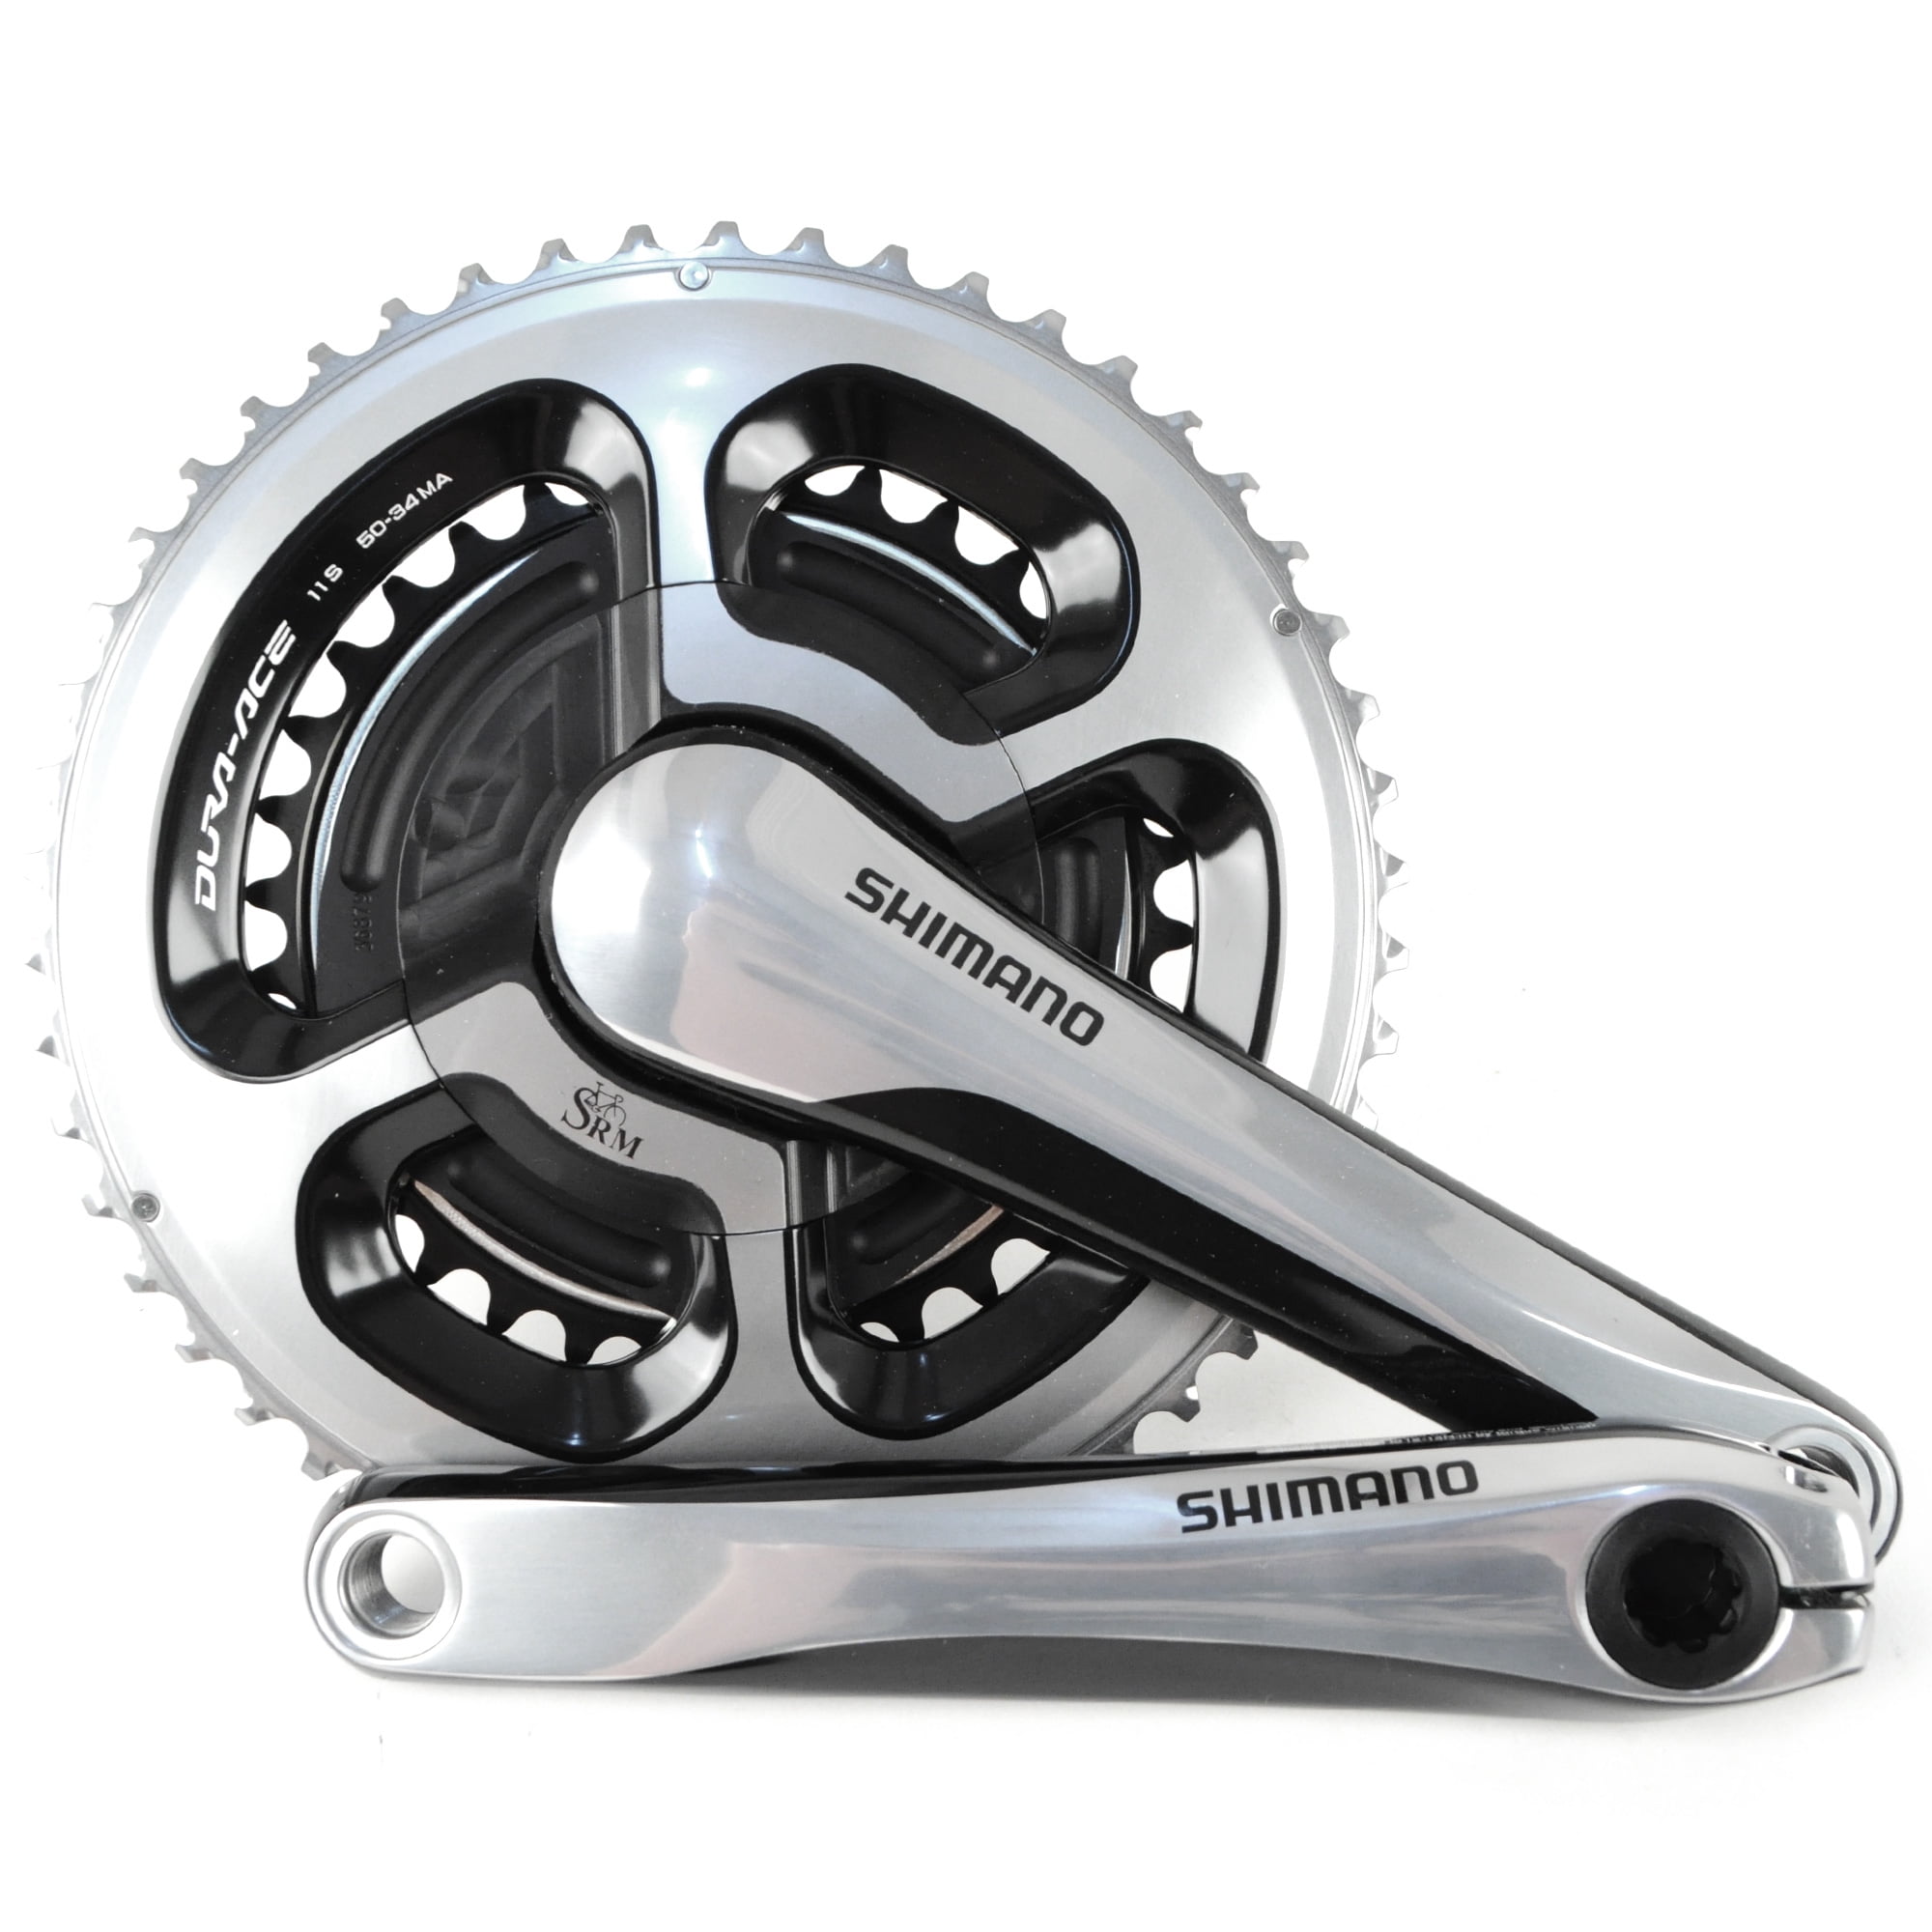 SRM Shimano Dura-Ace FC-9000 11-Speed Power Meter 175 Compact 50